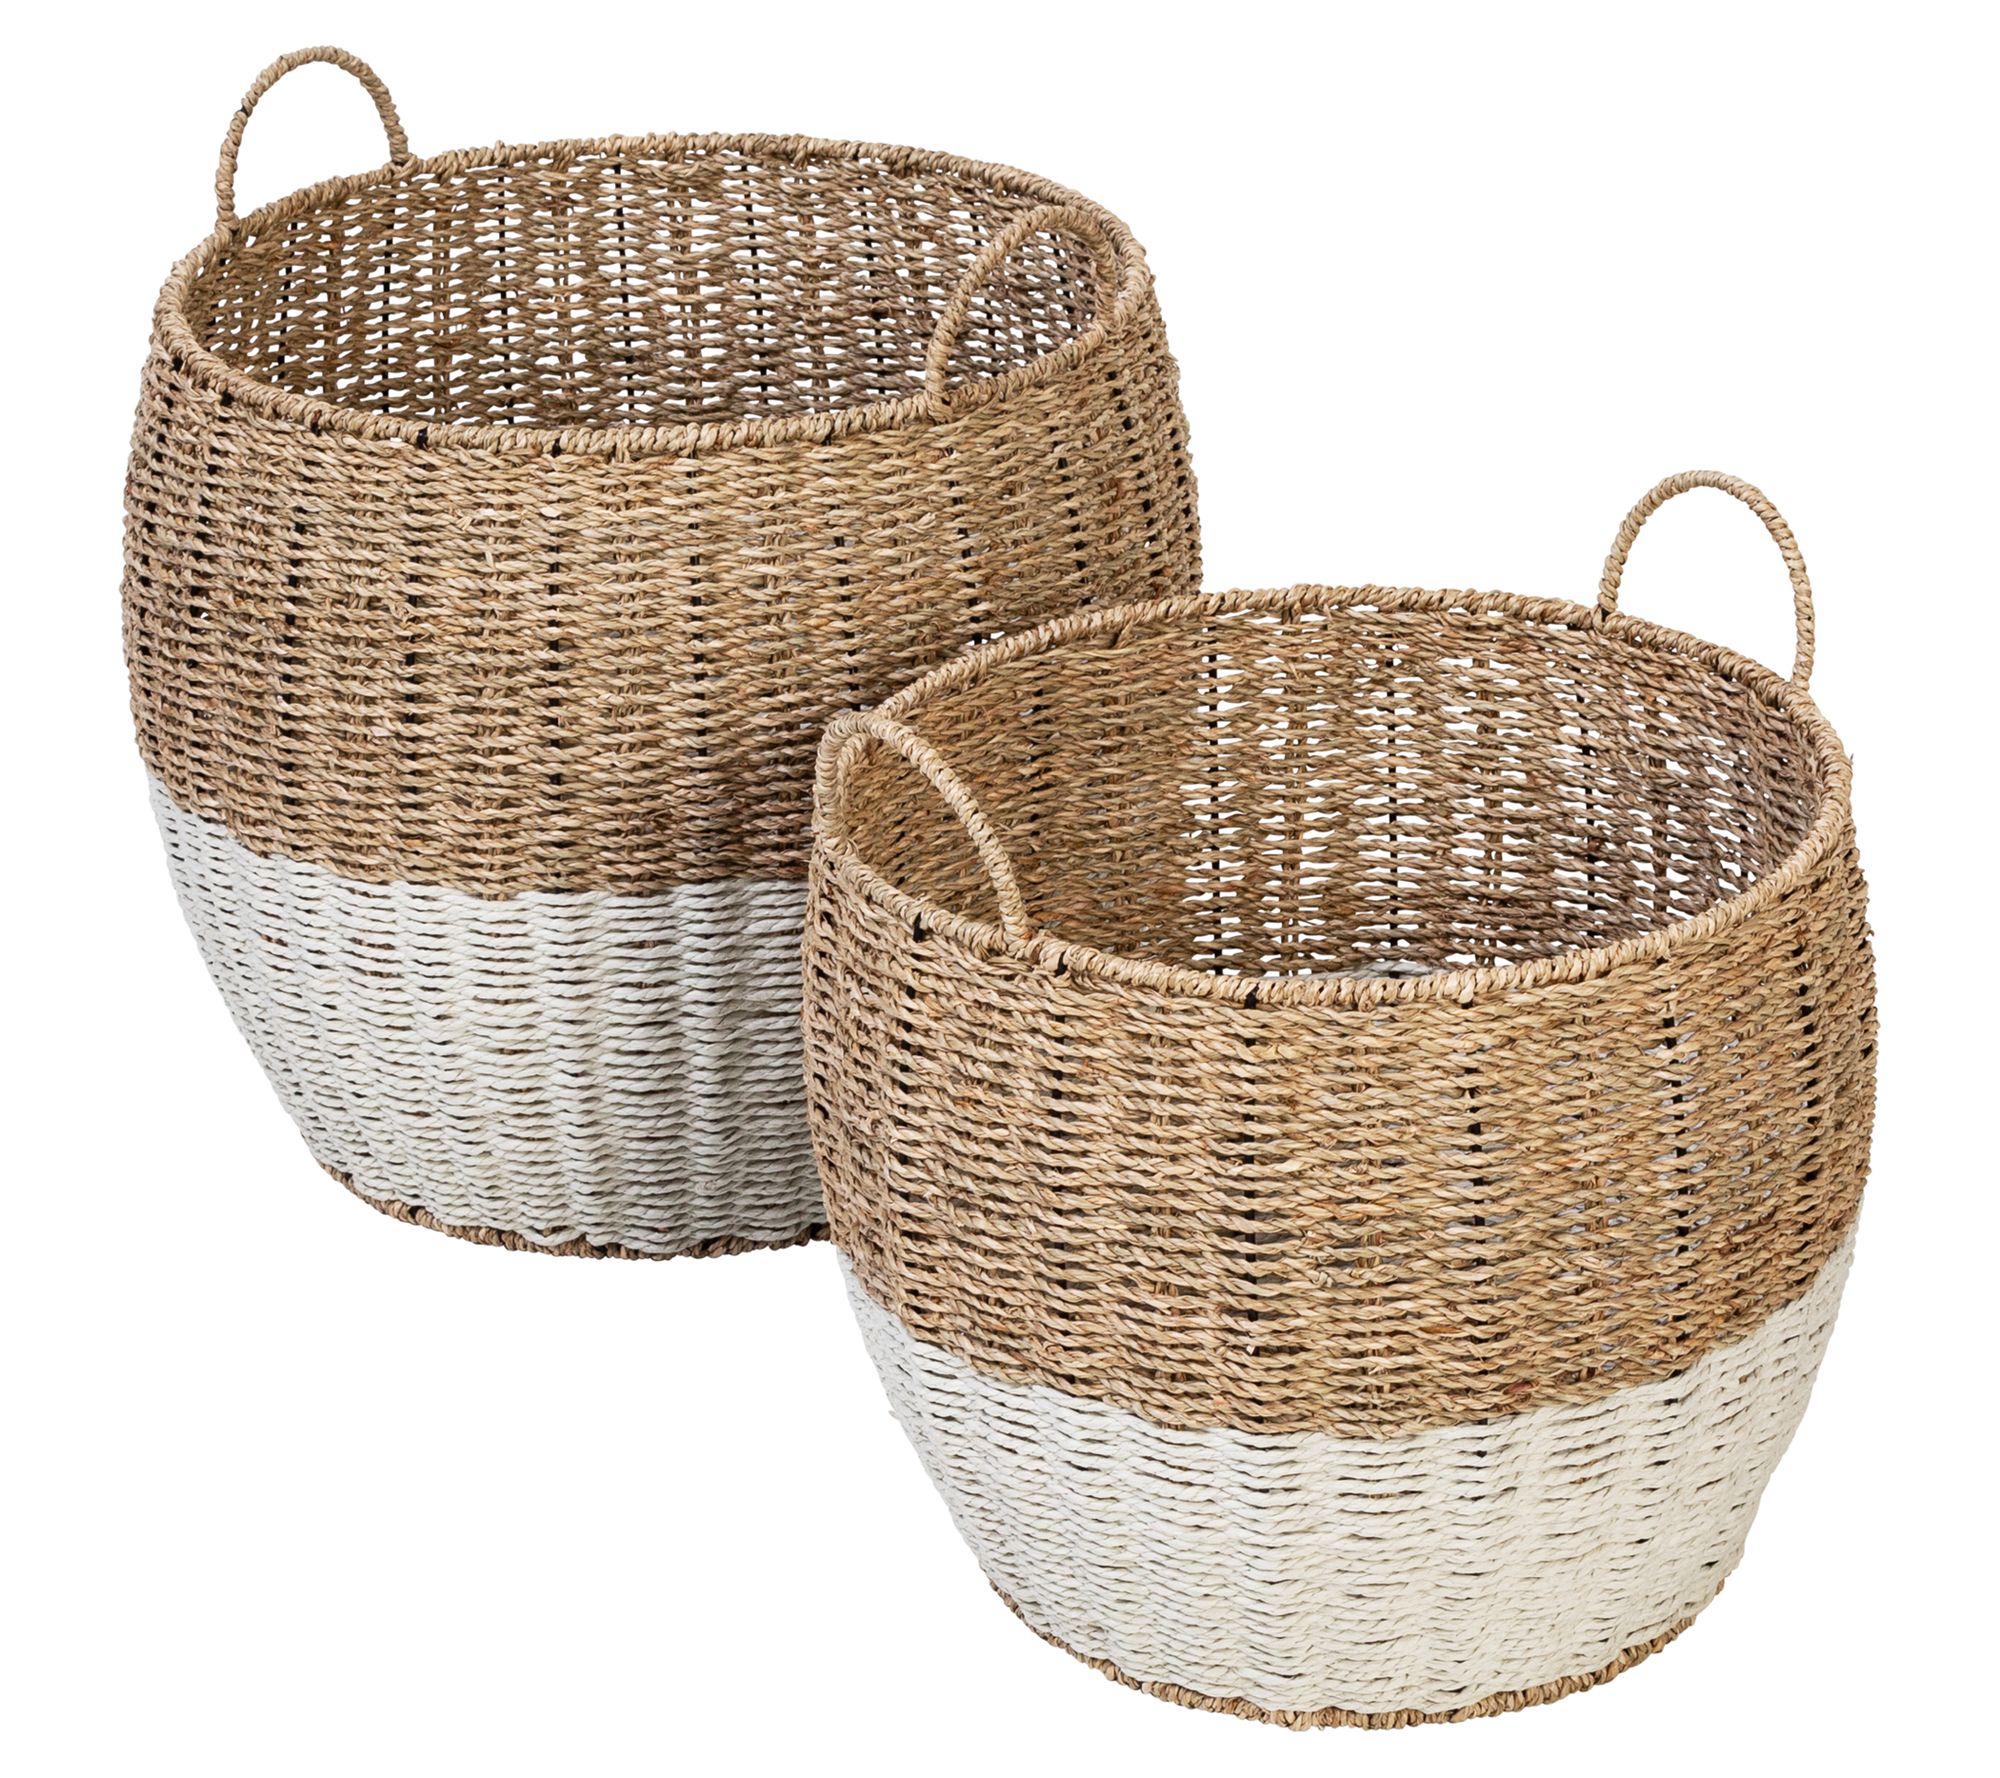 Manage your clutter with baskets, Locale Designs, Interior Design